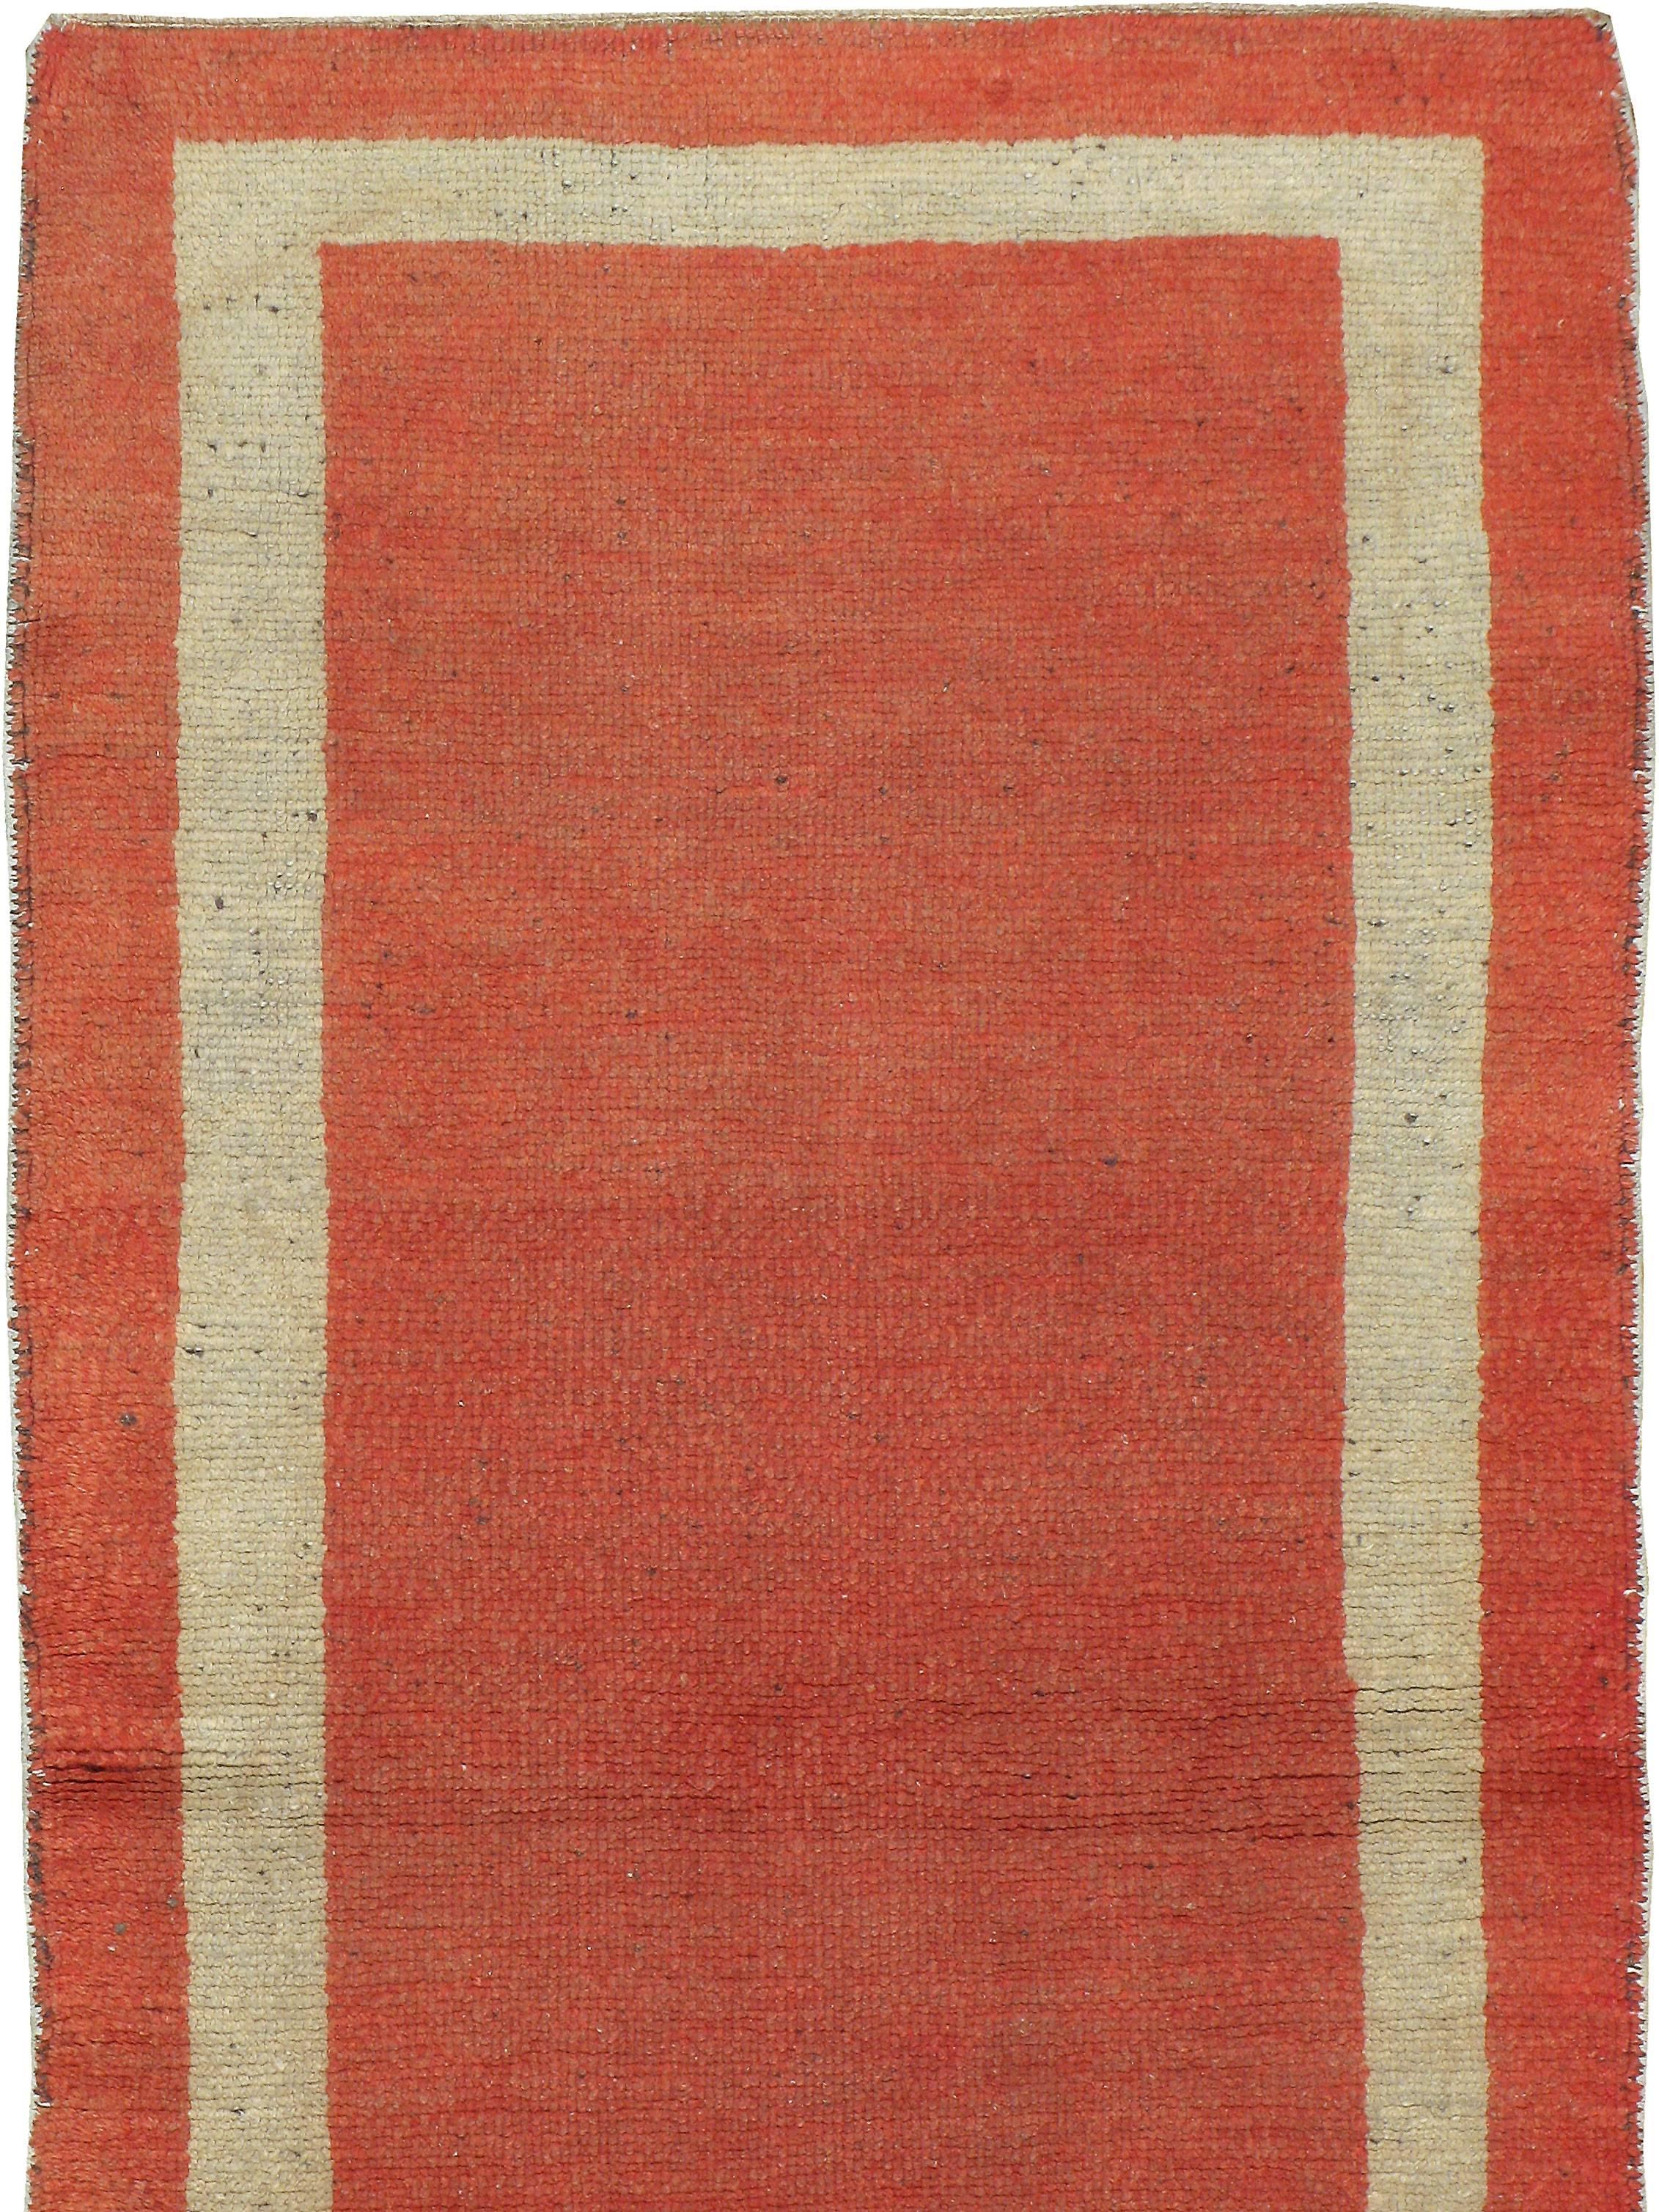 A vintage Turkish Oushak carpet from the second quarter of the 20th century featuring a minimalistic solid orange ground encased by a single border.